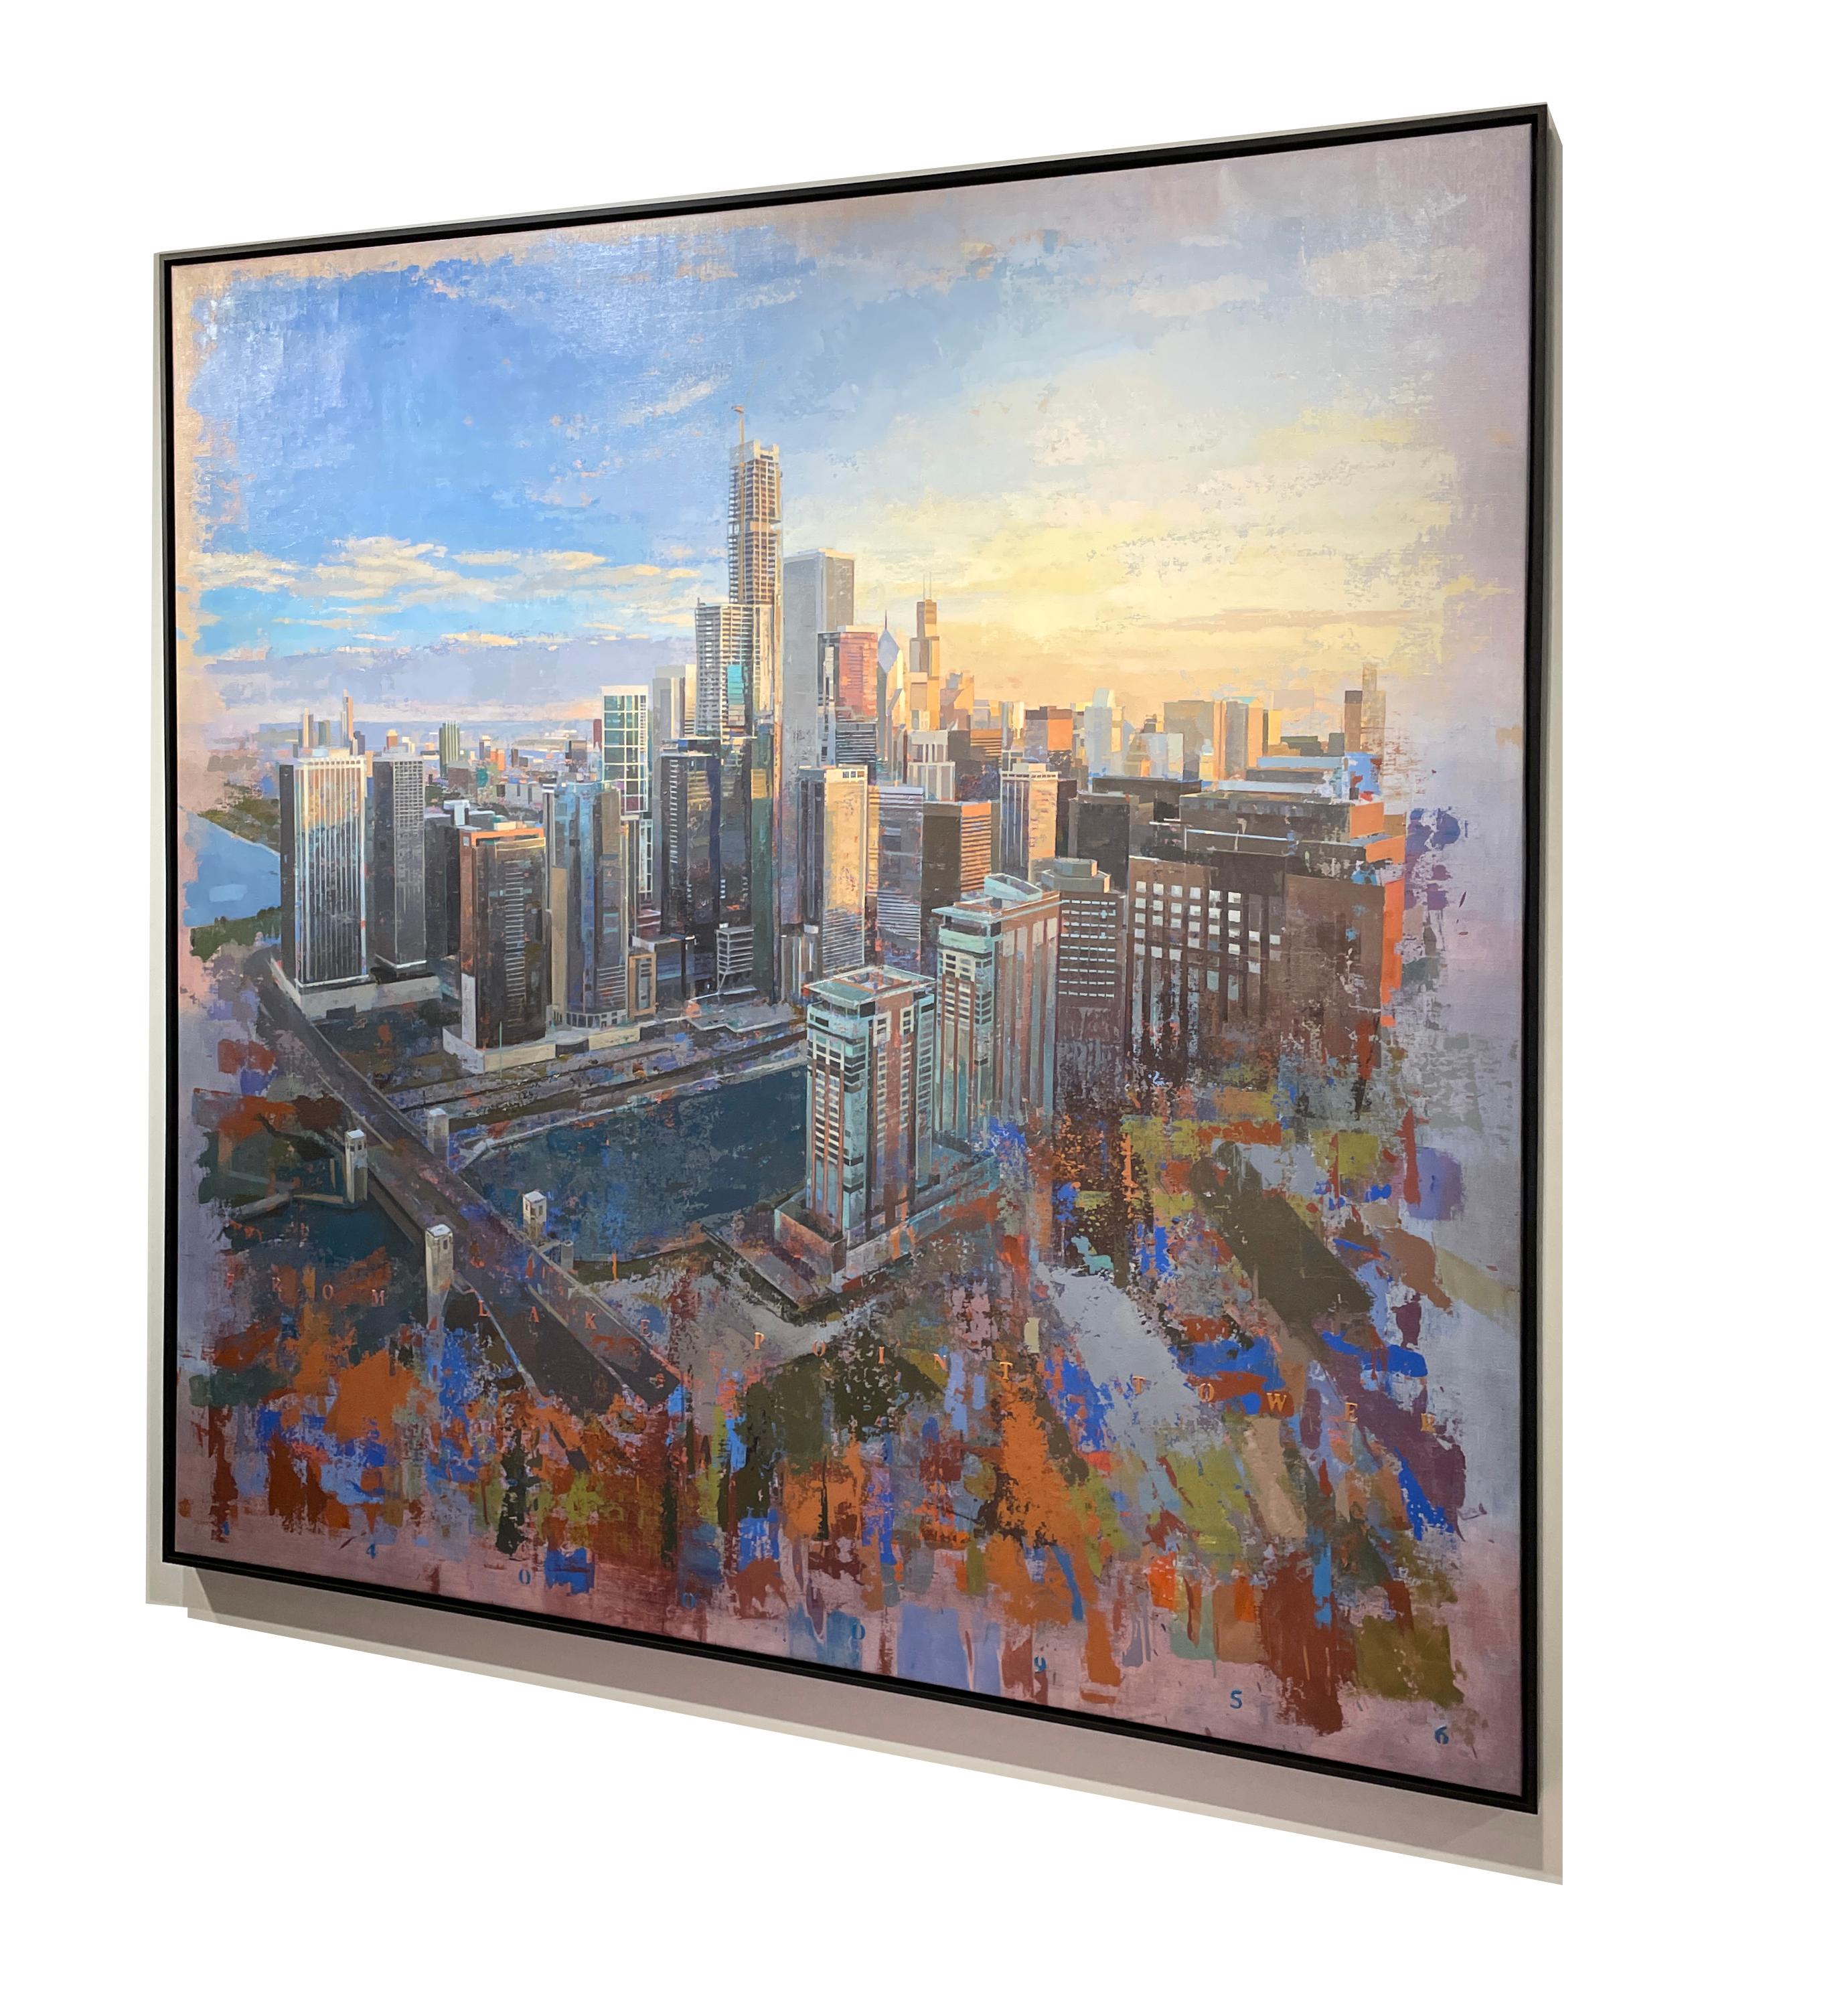 American City, Abstracted Landscape of Chicago Skyline, Original Acrylic  - Painting by Albert Vidal Moreno